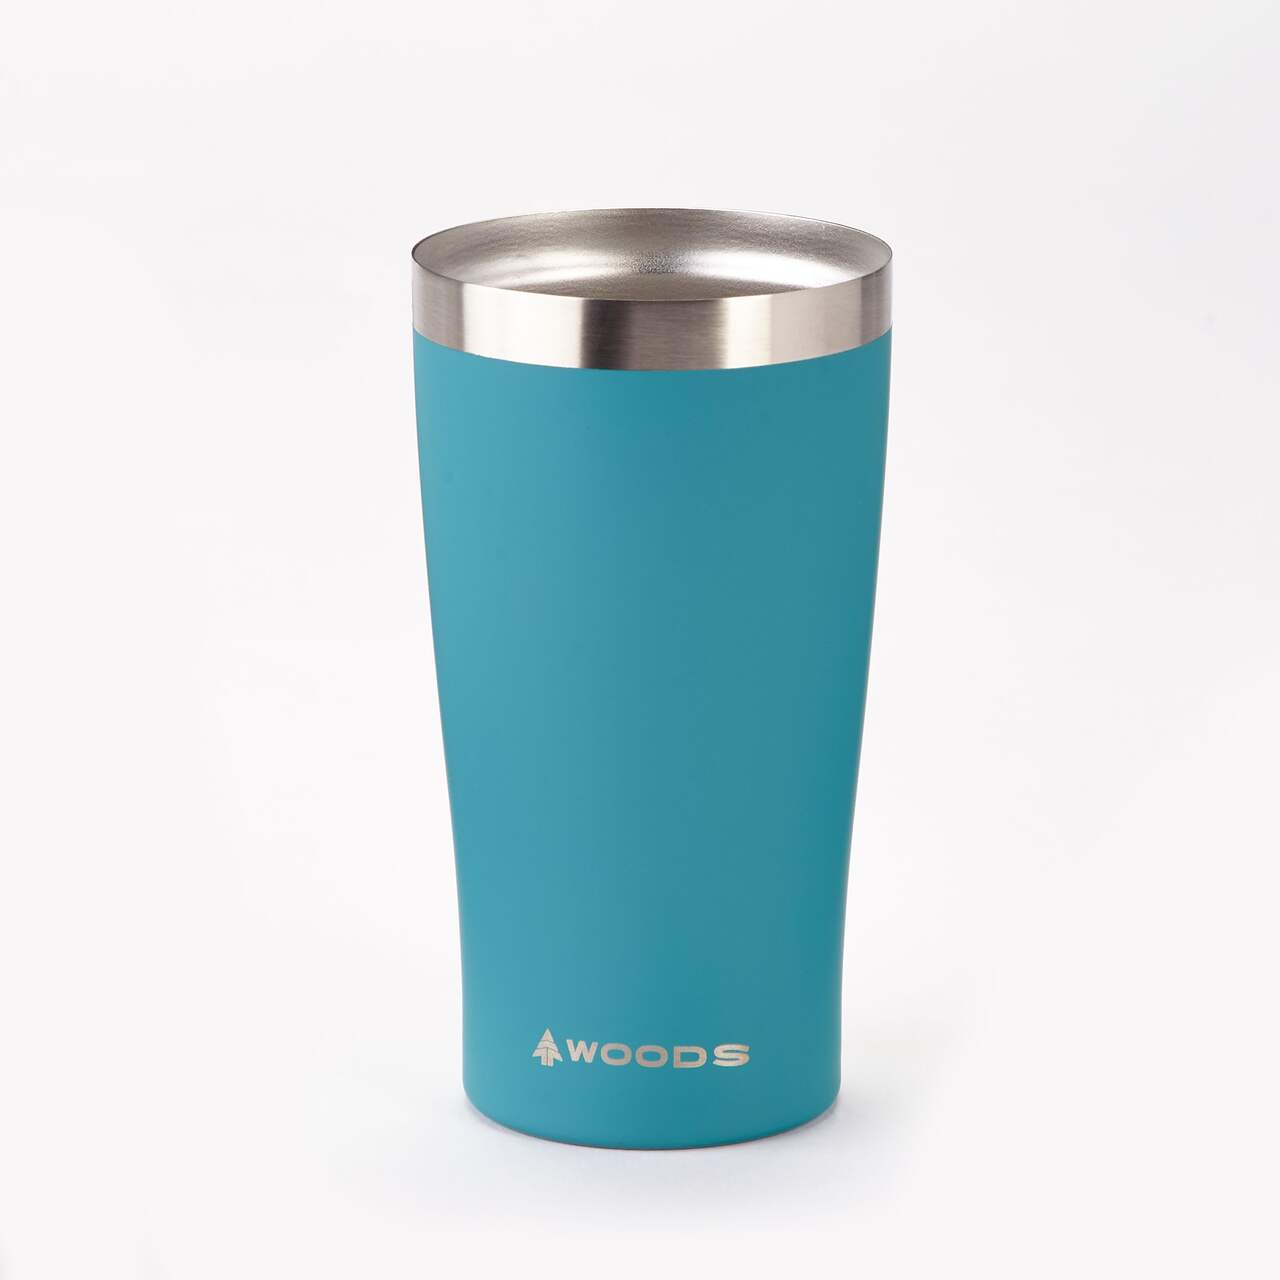 https://media-www.canadiantire.ca/product/playing/camping/camping-living/0763276/woods-450ml-large-wine-tumbler--090d1af1-bd49-45a2-8704-8a7c71279836-jpgrendition.jpg?imdensity=1&imwidth=640&impolicy=mZoom